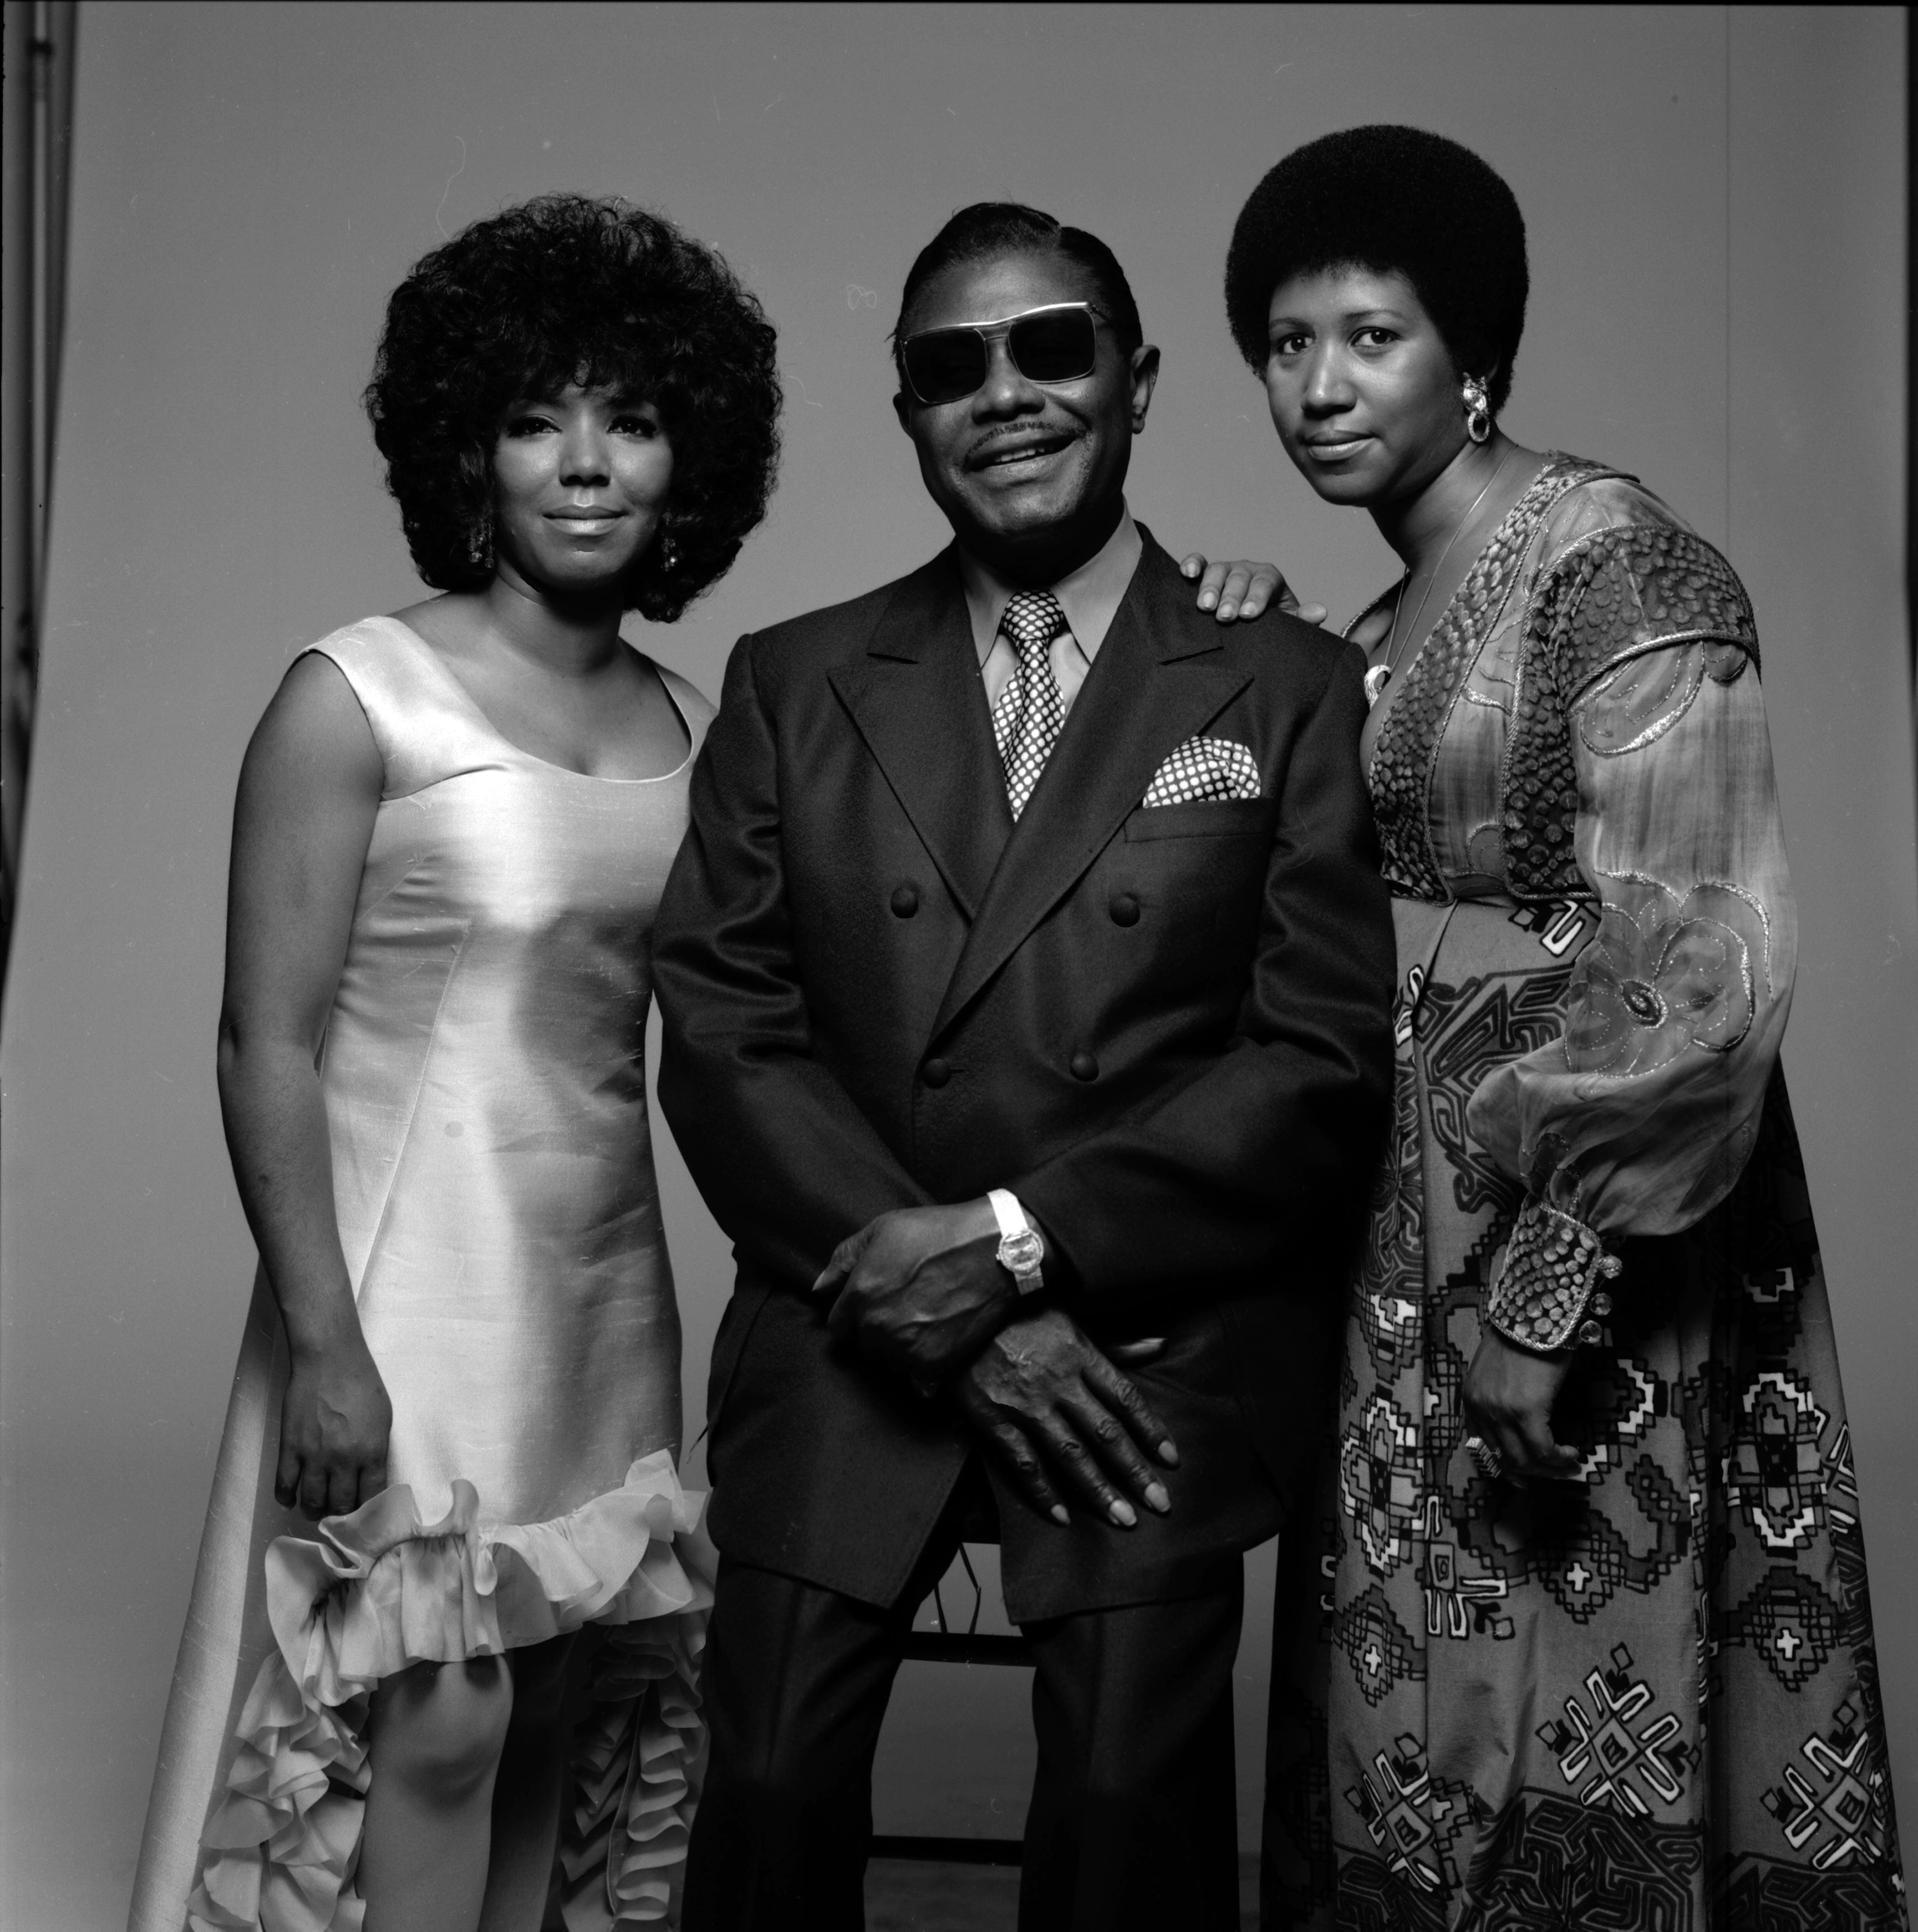 Portrait of American singer Aretha Franklin (center), her father, Baptist preacher CL (born Clarence LaVaughn) (1915 - 1984), and her sister her sister, fellow singer Erma (1938 - 2002), New York, 1971. | Source: Getty Images